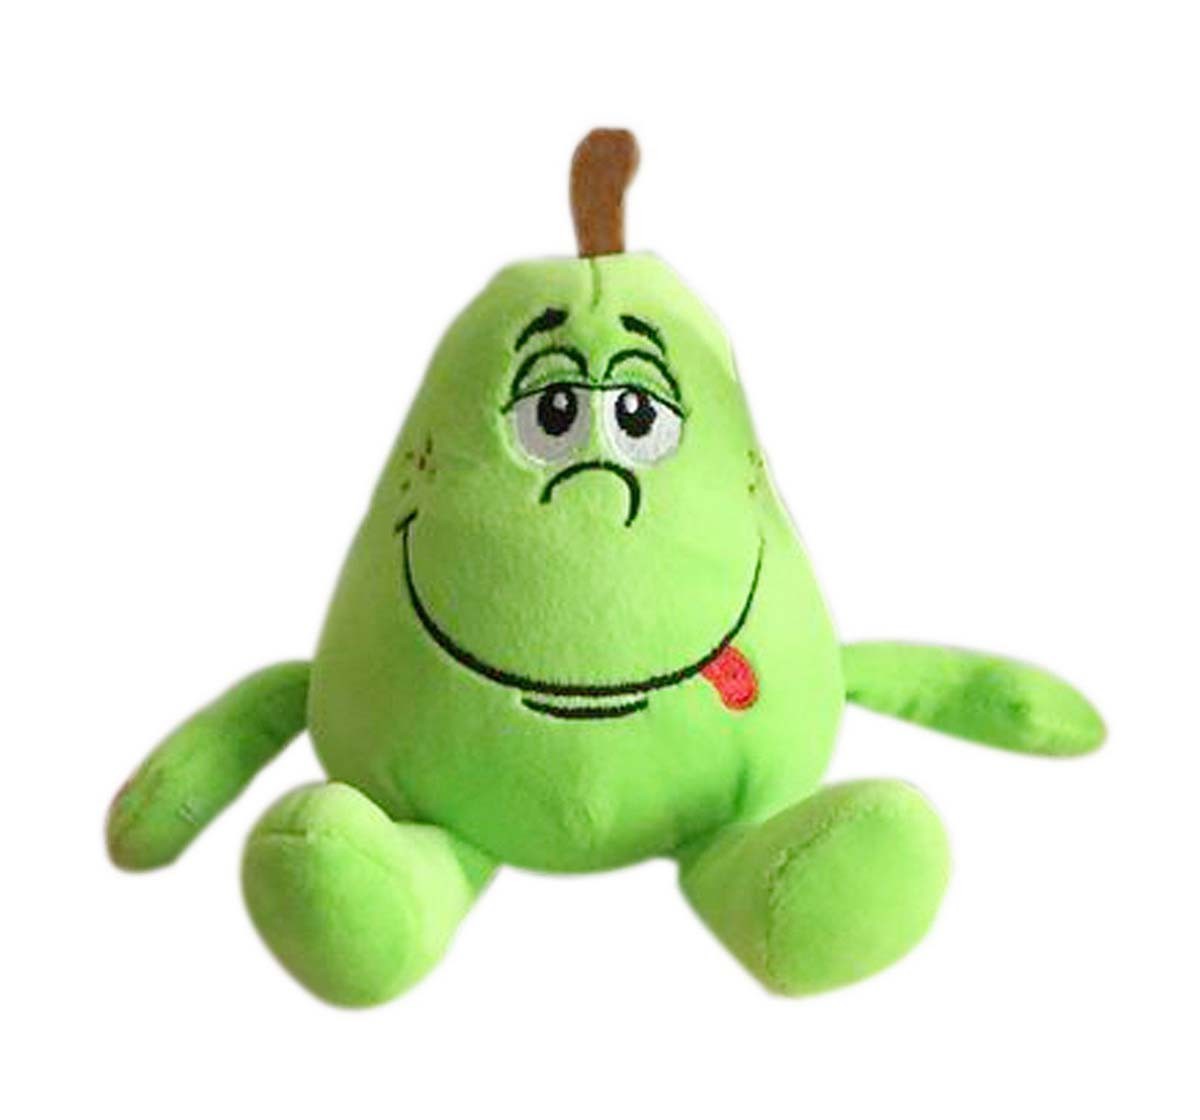 Excel Production My Baby Excel Pear Plush 25 Cm Quirky Soft Toys for Kids Age 1Y+ - 18 Cm